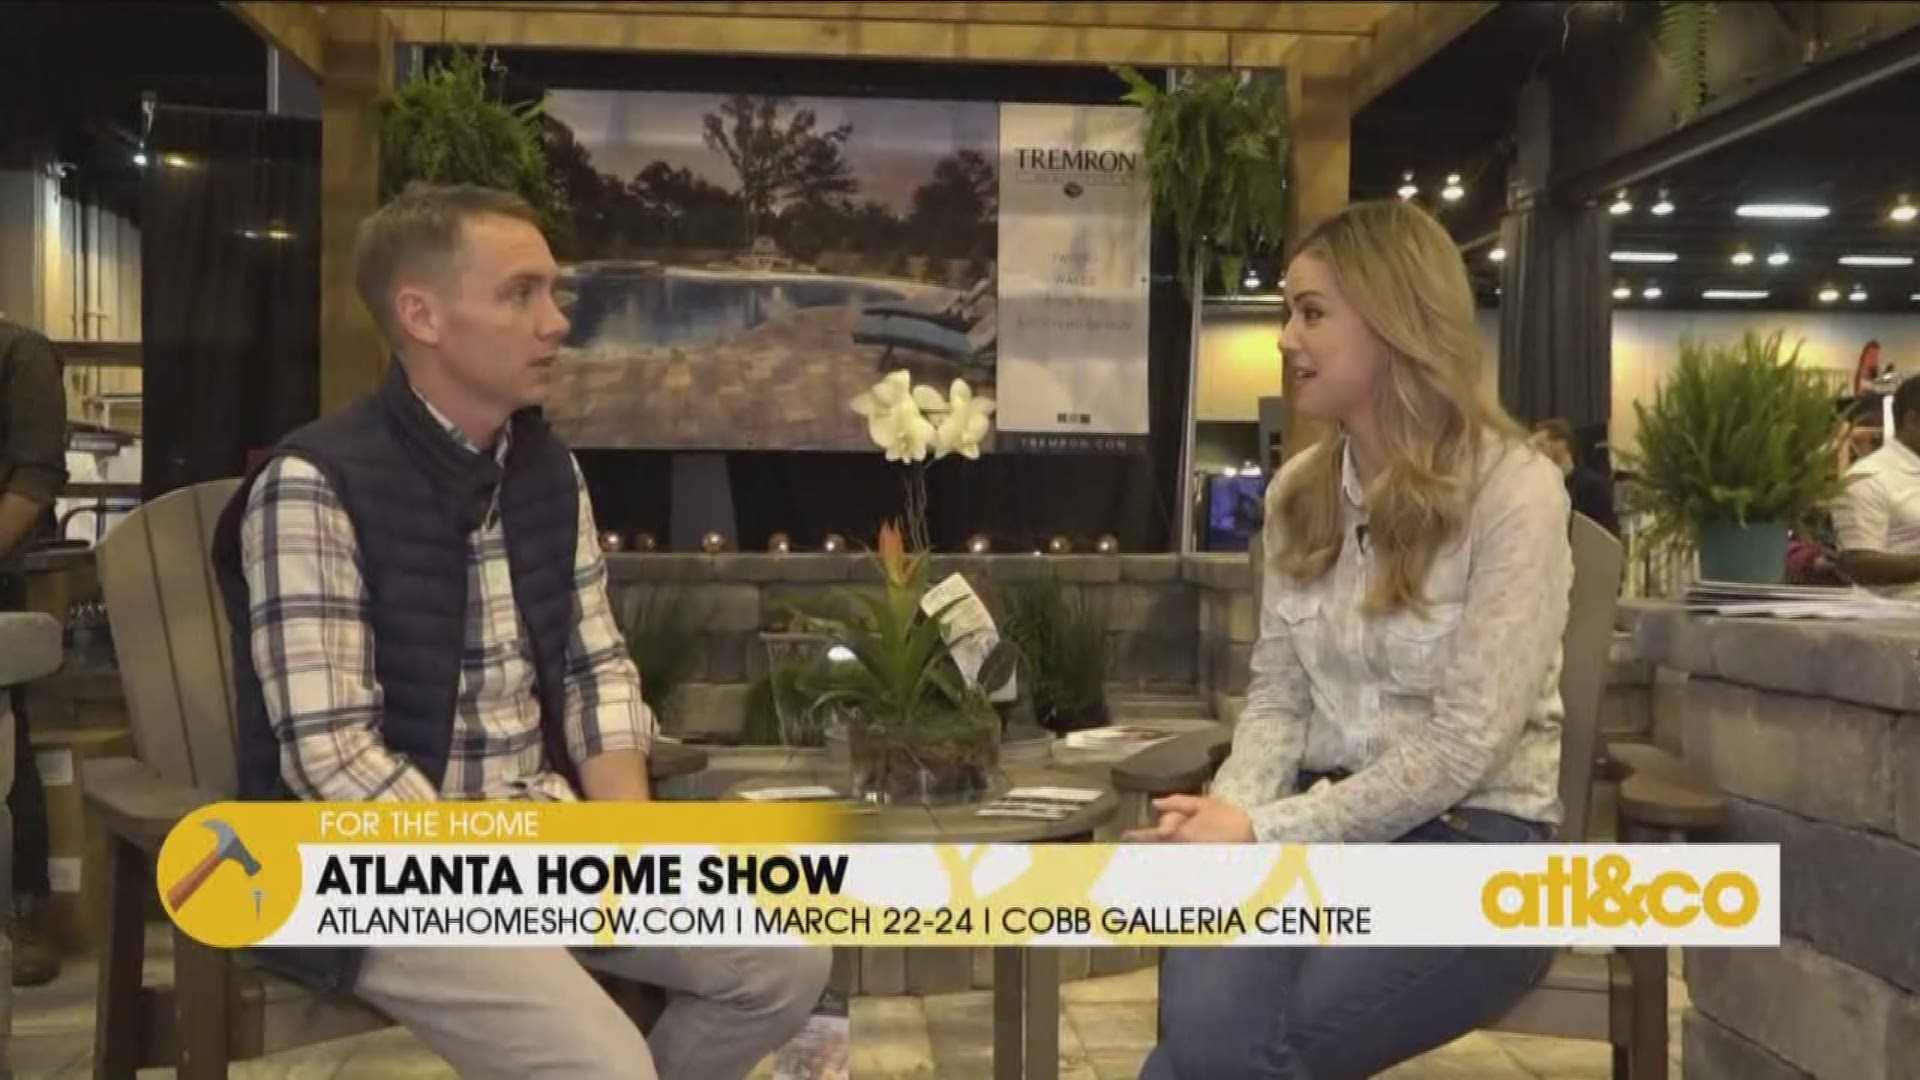 Check out The Atlanta Home Show all weekend at Cobb Galleria Centre and meet 'Fixer Upper' craftsman Clint Harp!